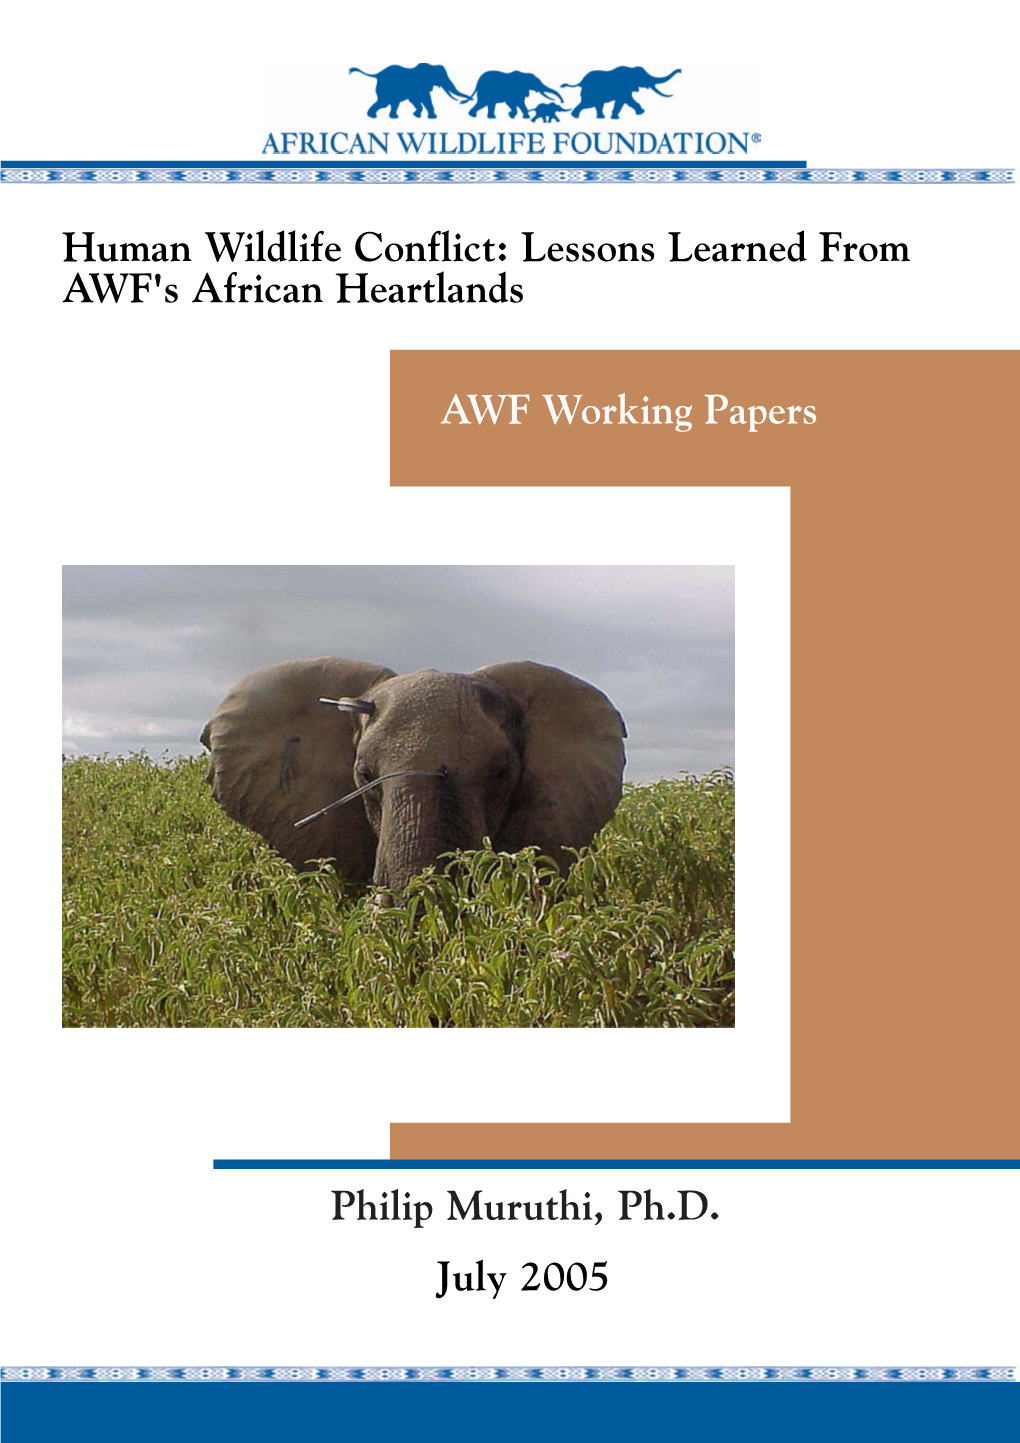 Human Wildlife Conflict: Lessons Learned from AWF's African Heartlands